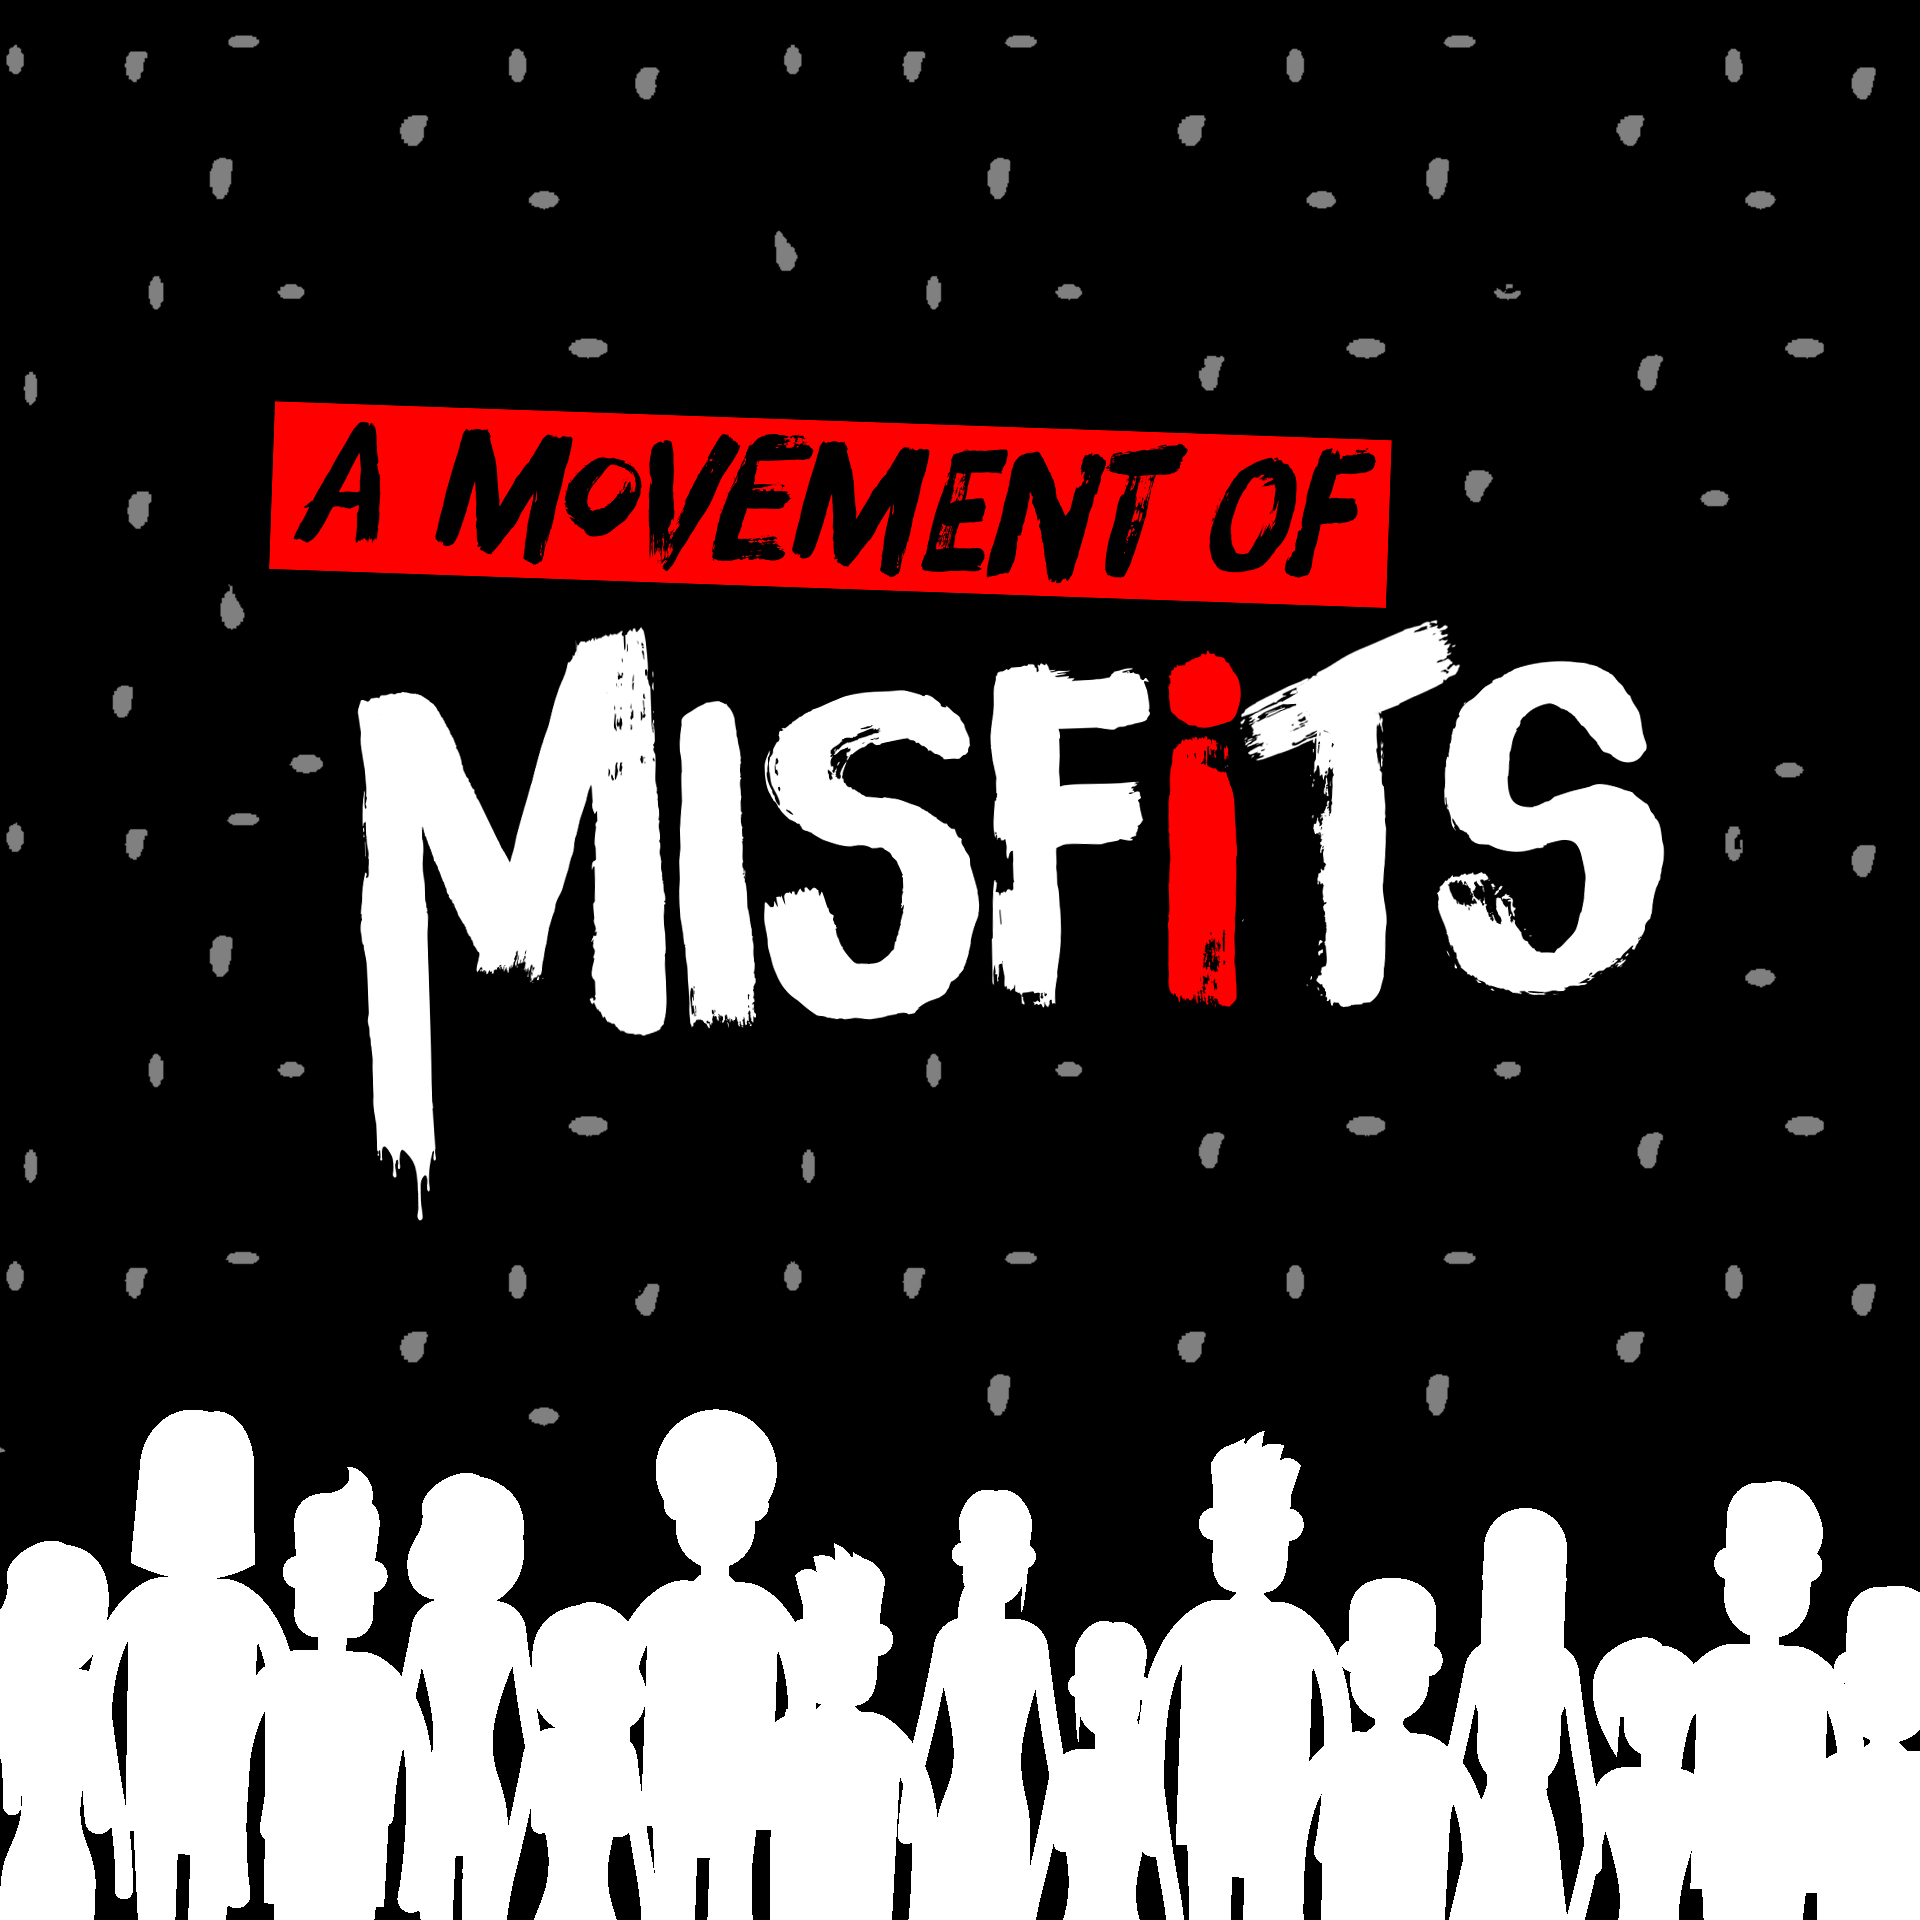 A Movement of Misfits #1: Acts 1:1-8, Acts 2:1-13